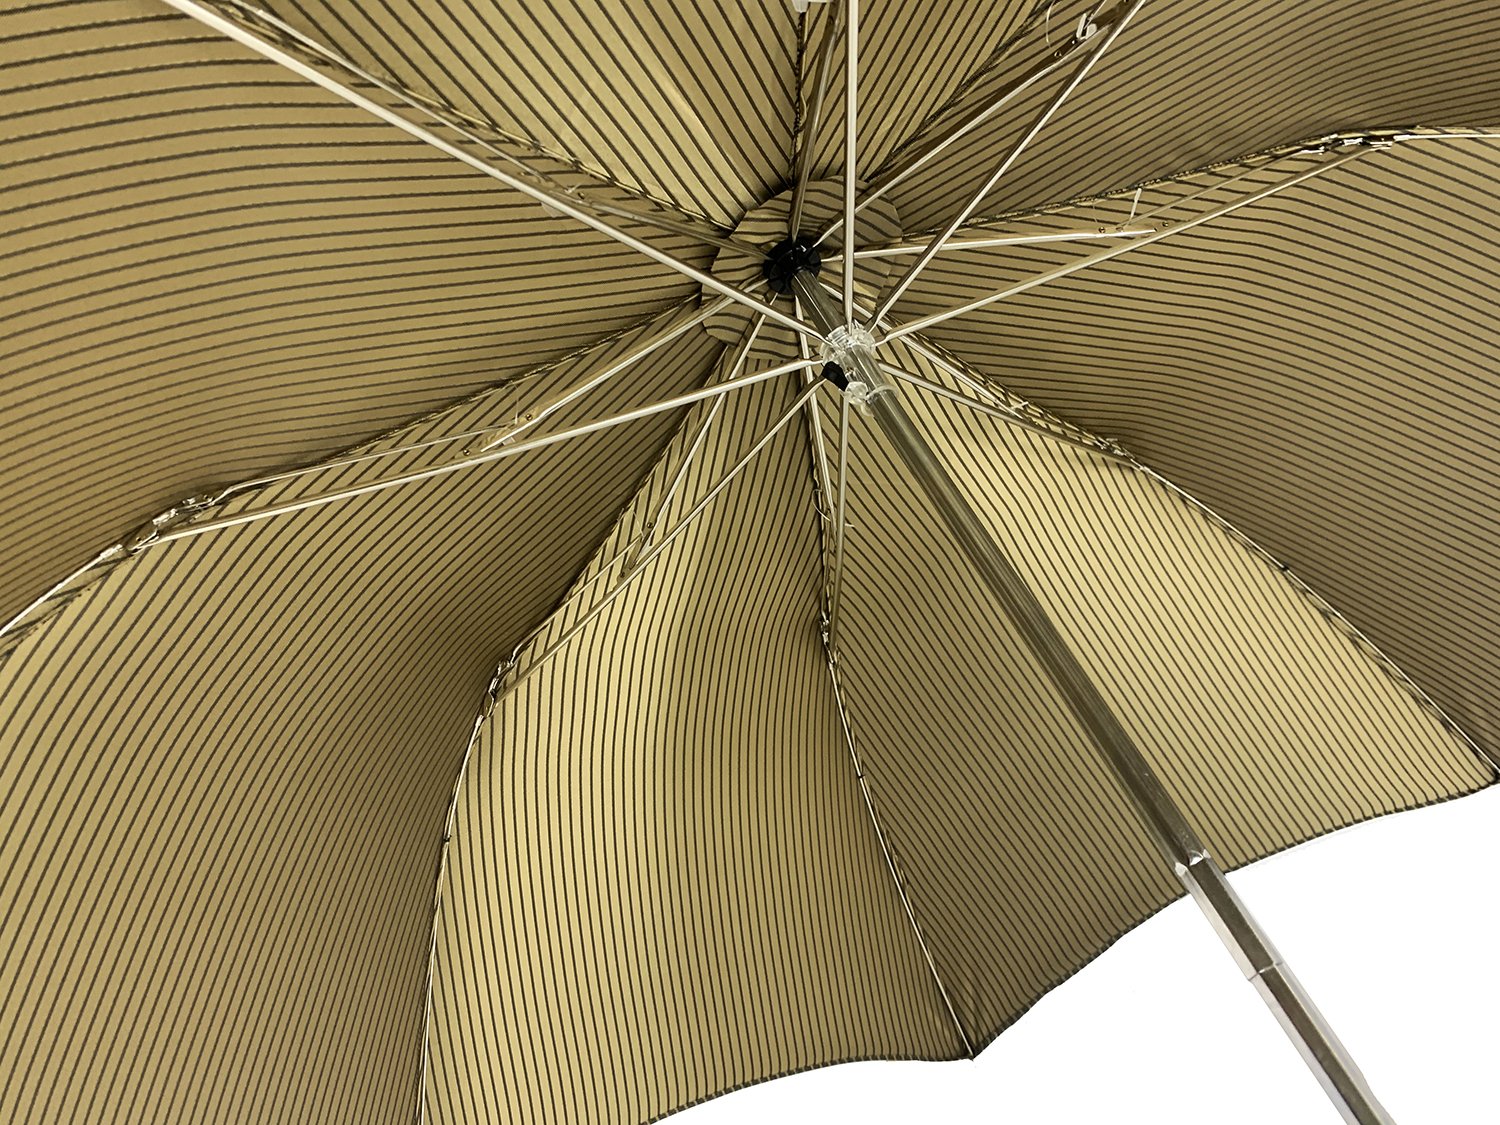 Folding Brown and Gold striped umbrella for men - IL MARCHESATO LUXURY UMBRELLAS, CANES AND SHOEHORNS